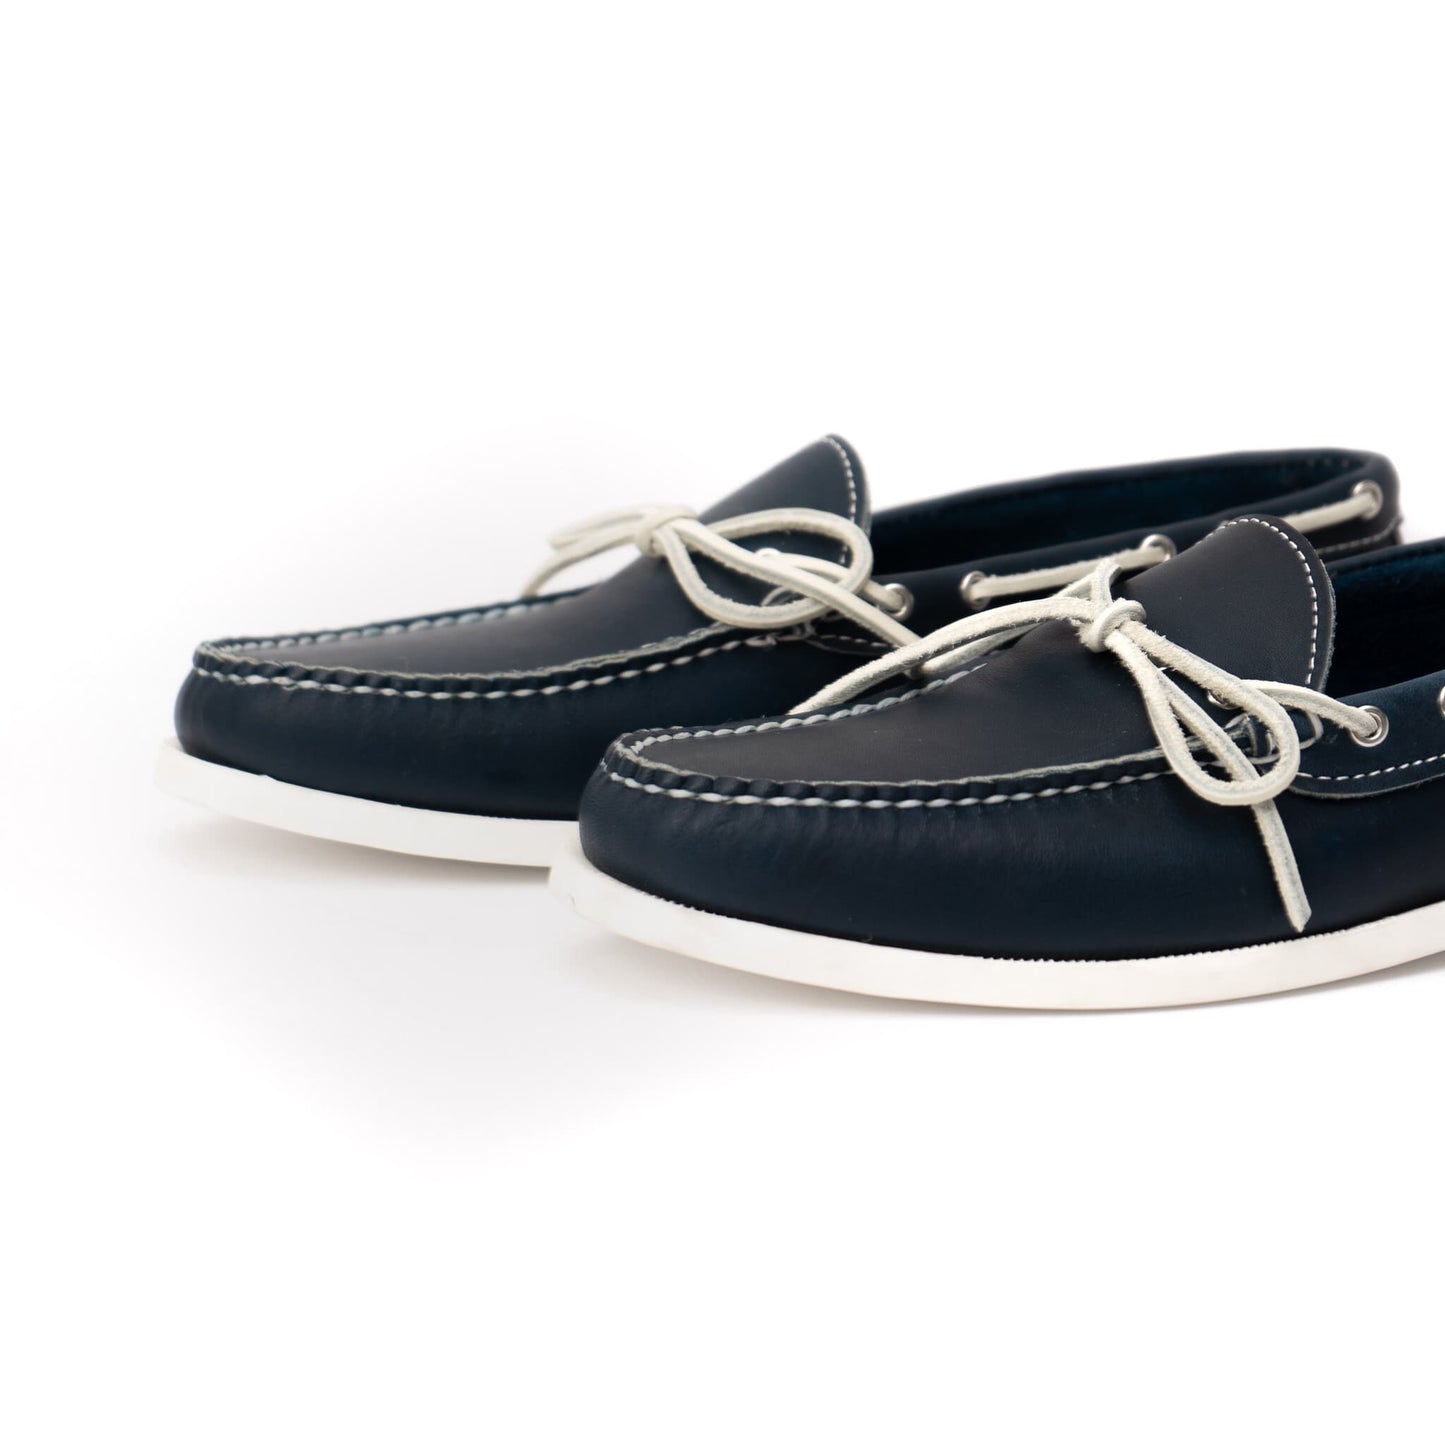 Dexter USA Camp Moc - Navy Full Grain Leather - White Boat Sole